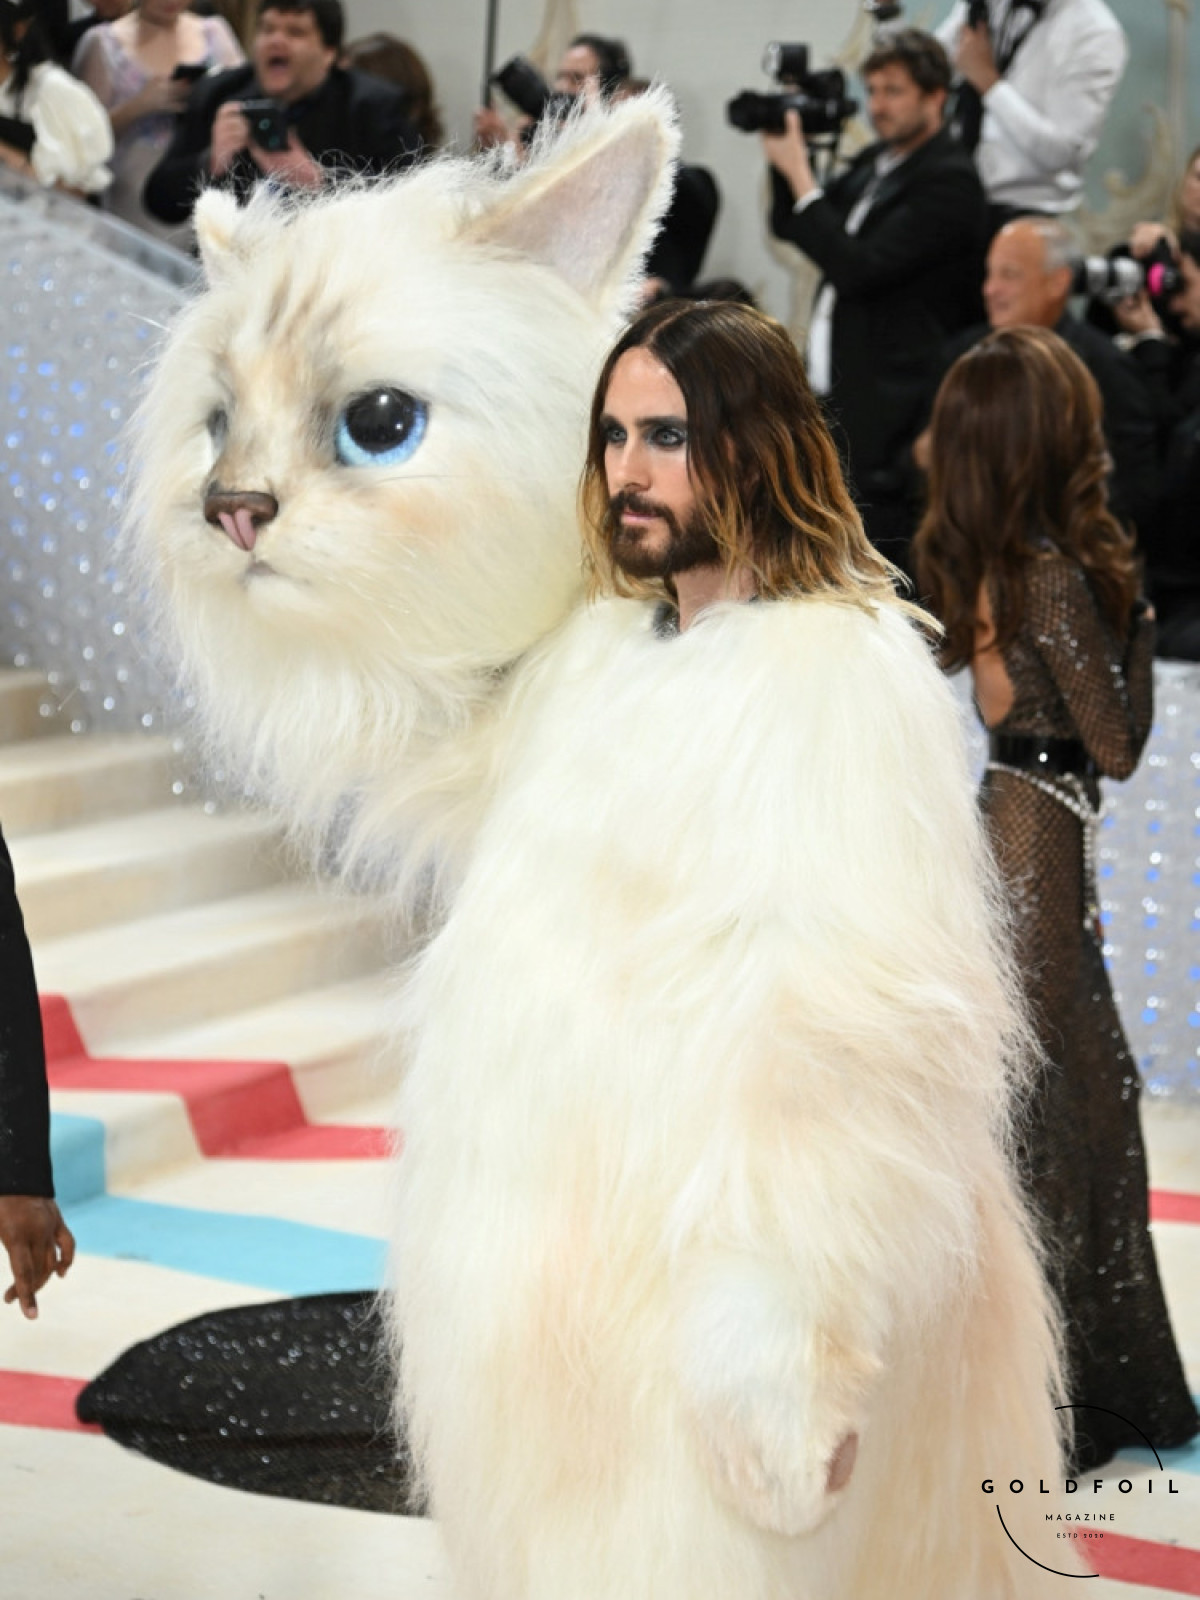 Jared Leto at the Met gala 2023 wearing a full cat costume in memory of Karl Lagerfeld and his cat Choupette